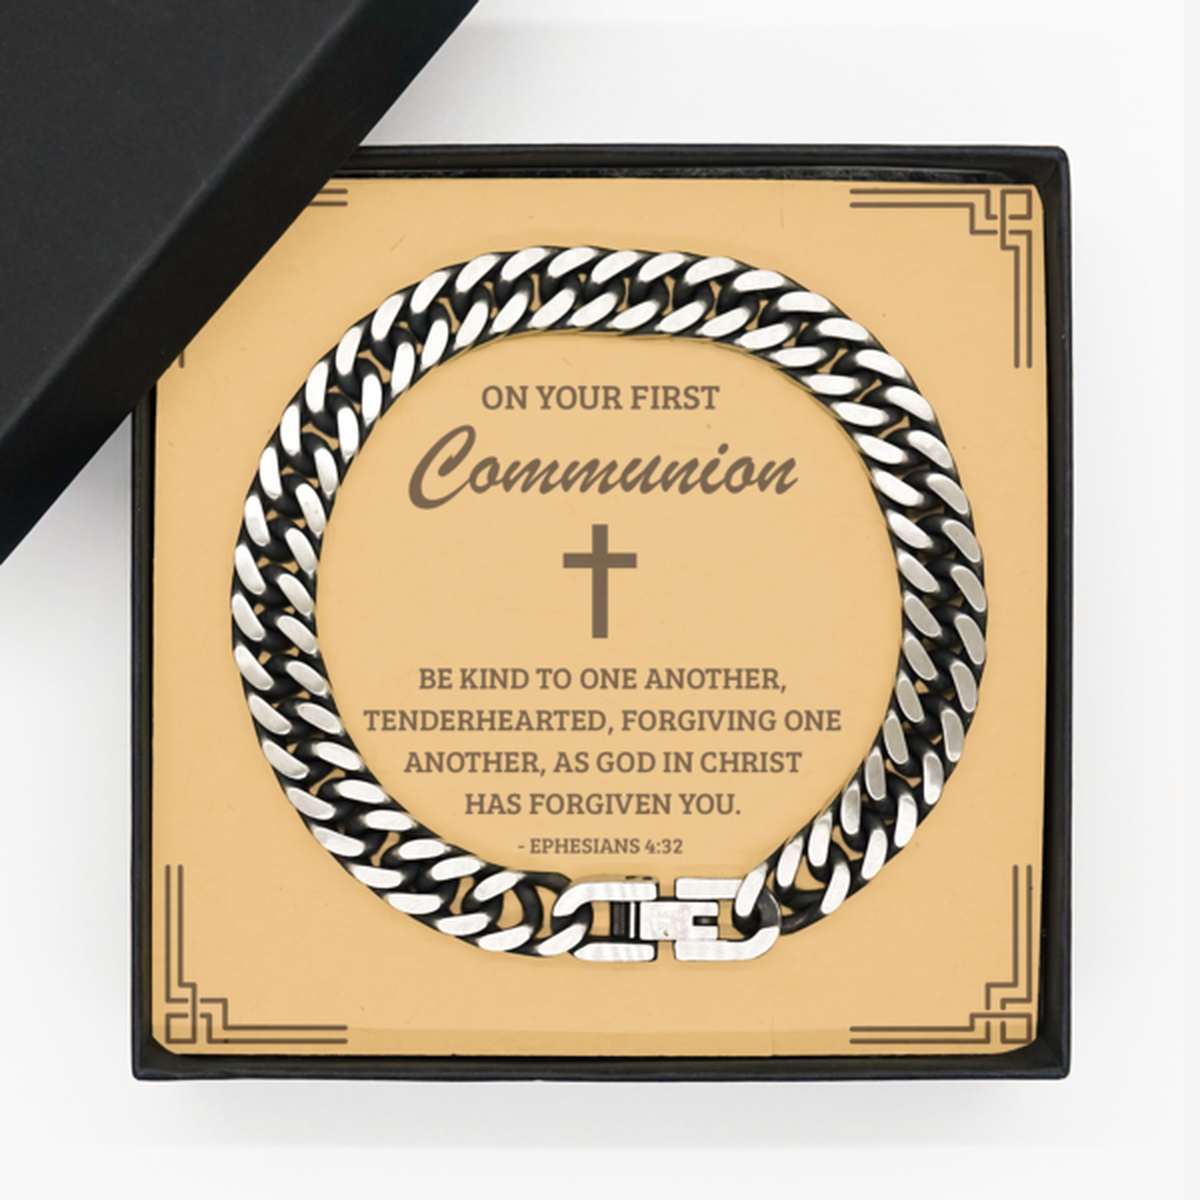 First Communion Gifts for Teenage Boys, Be kind to one another, Cuban Link Chain Bracelet with Bible Verse Message Card, Religious Catholic Bracelet for Son, Grandson, Dad, Godfather